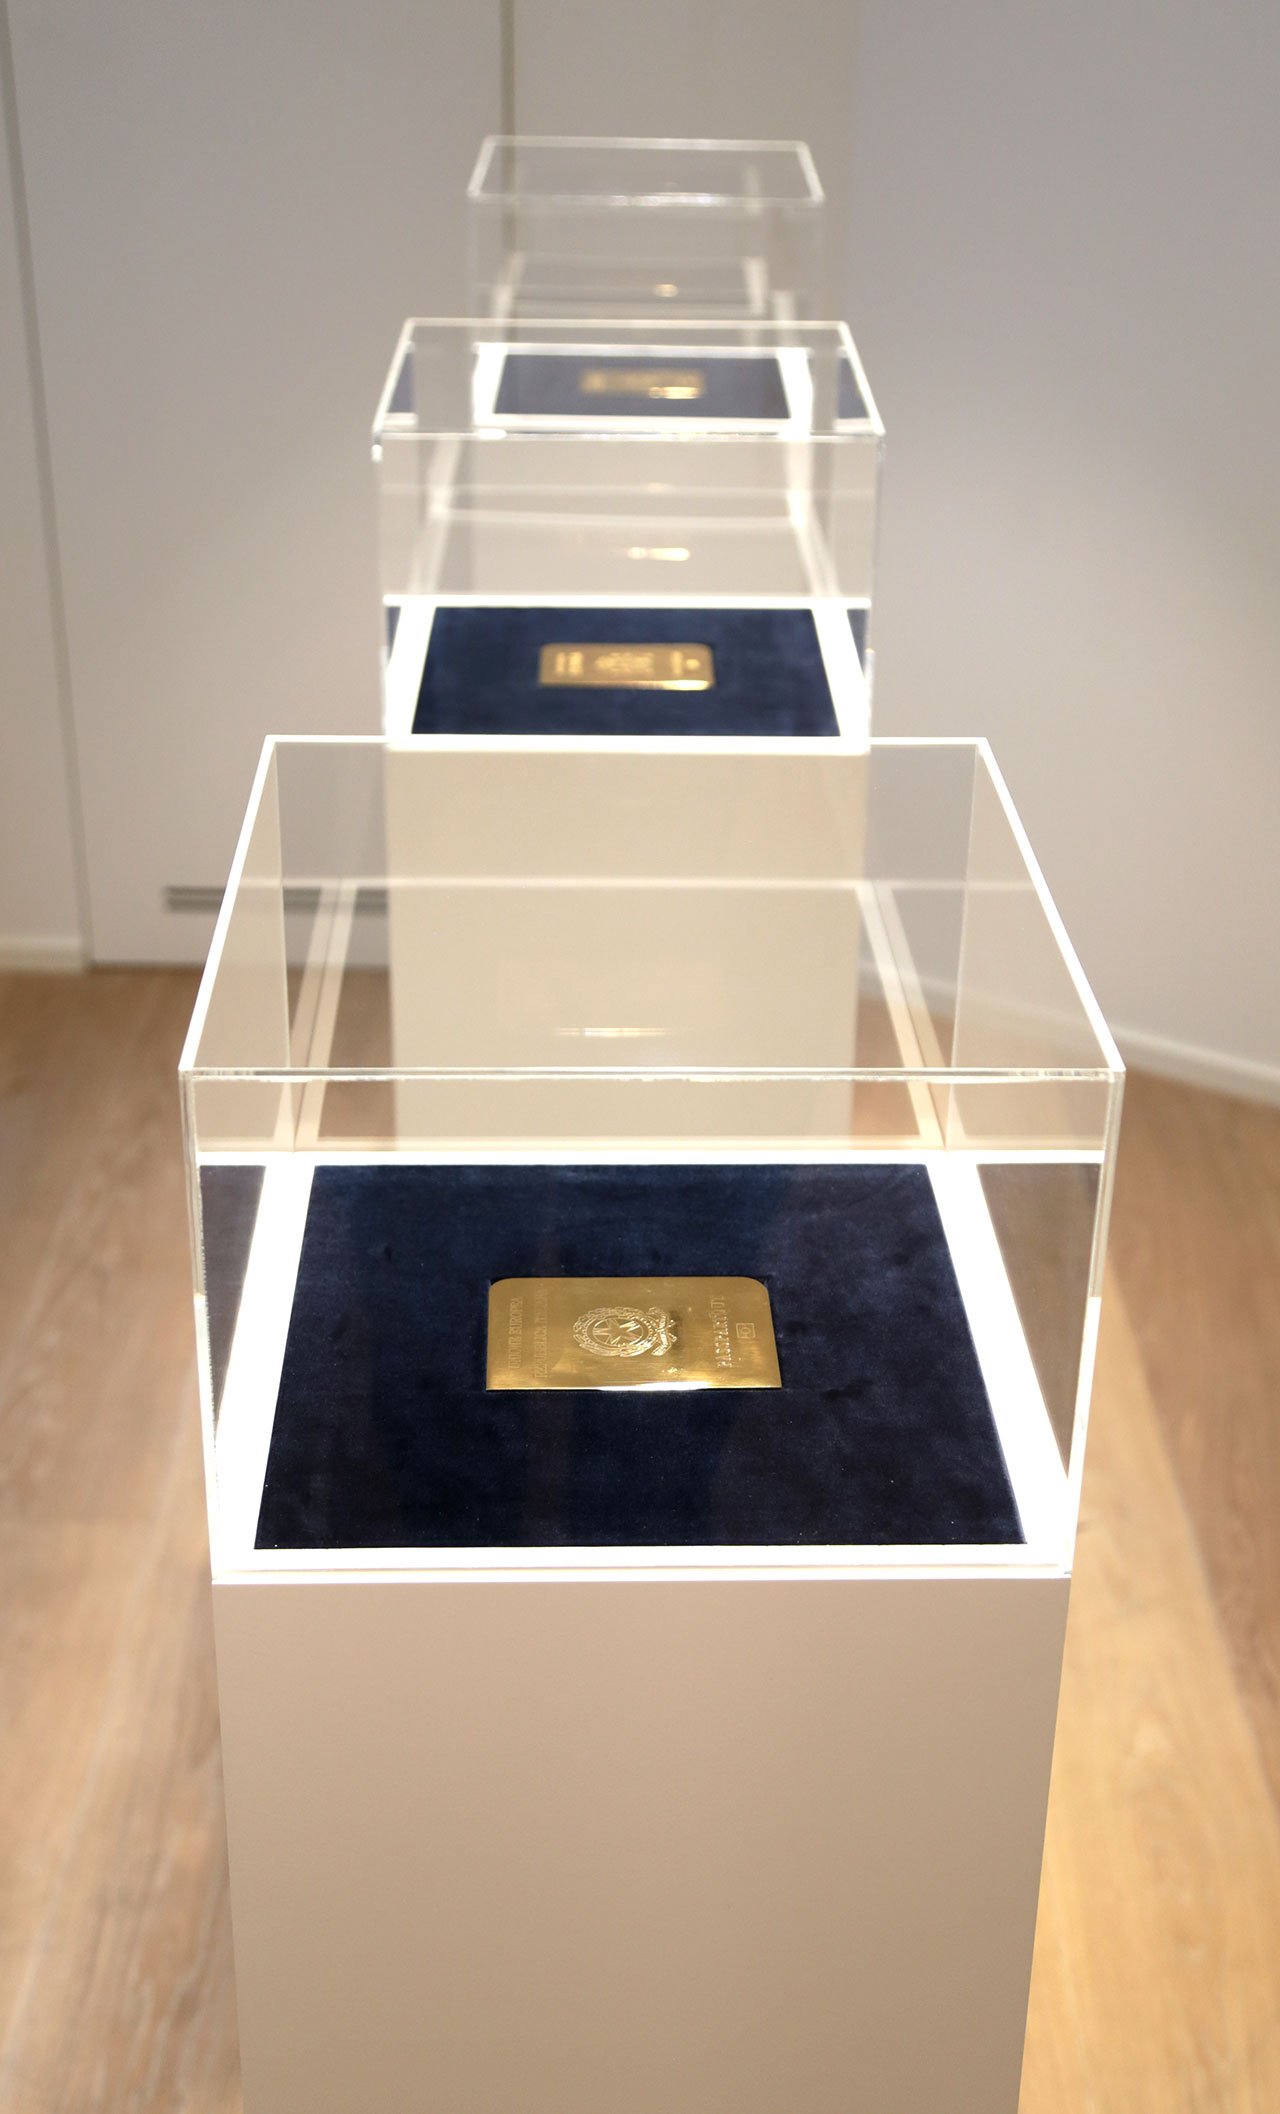 Giuseppe Stampone, Passepartouts, 2016; gold-plated cooper plate engraved 12,5x0,5x8,8 cm (particular) © Giuseppe Stampone, MLF | Marie-Laure Fleisch Gallery.